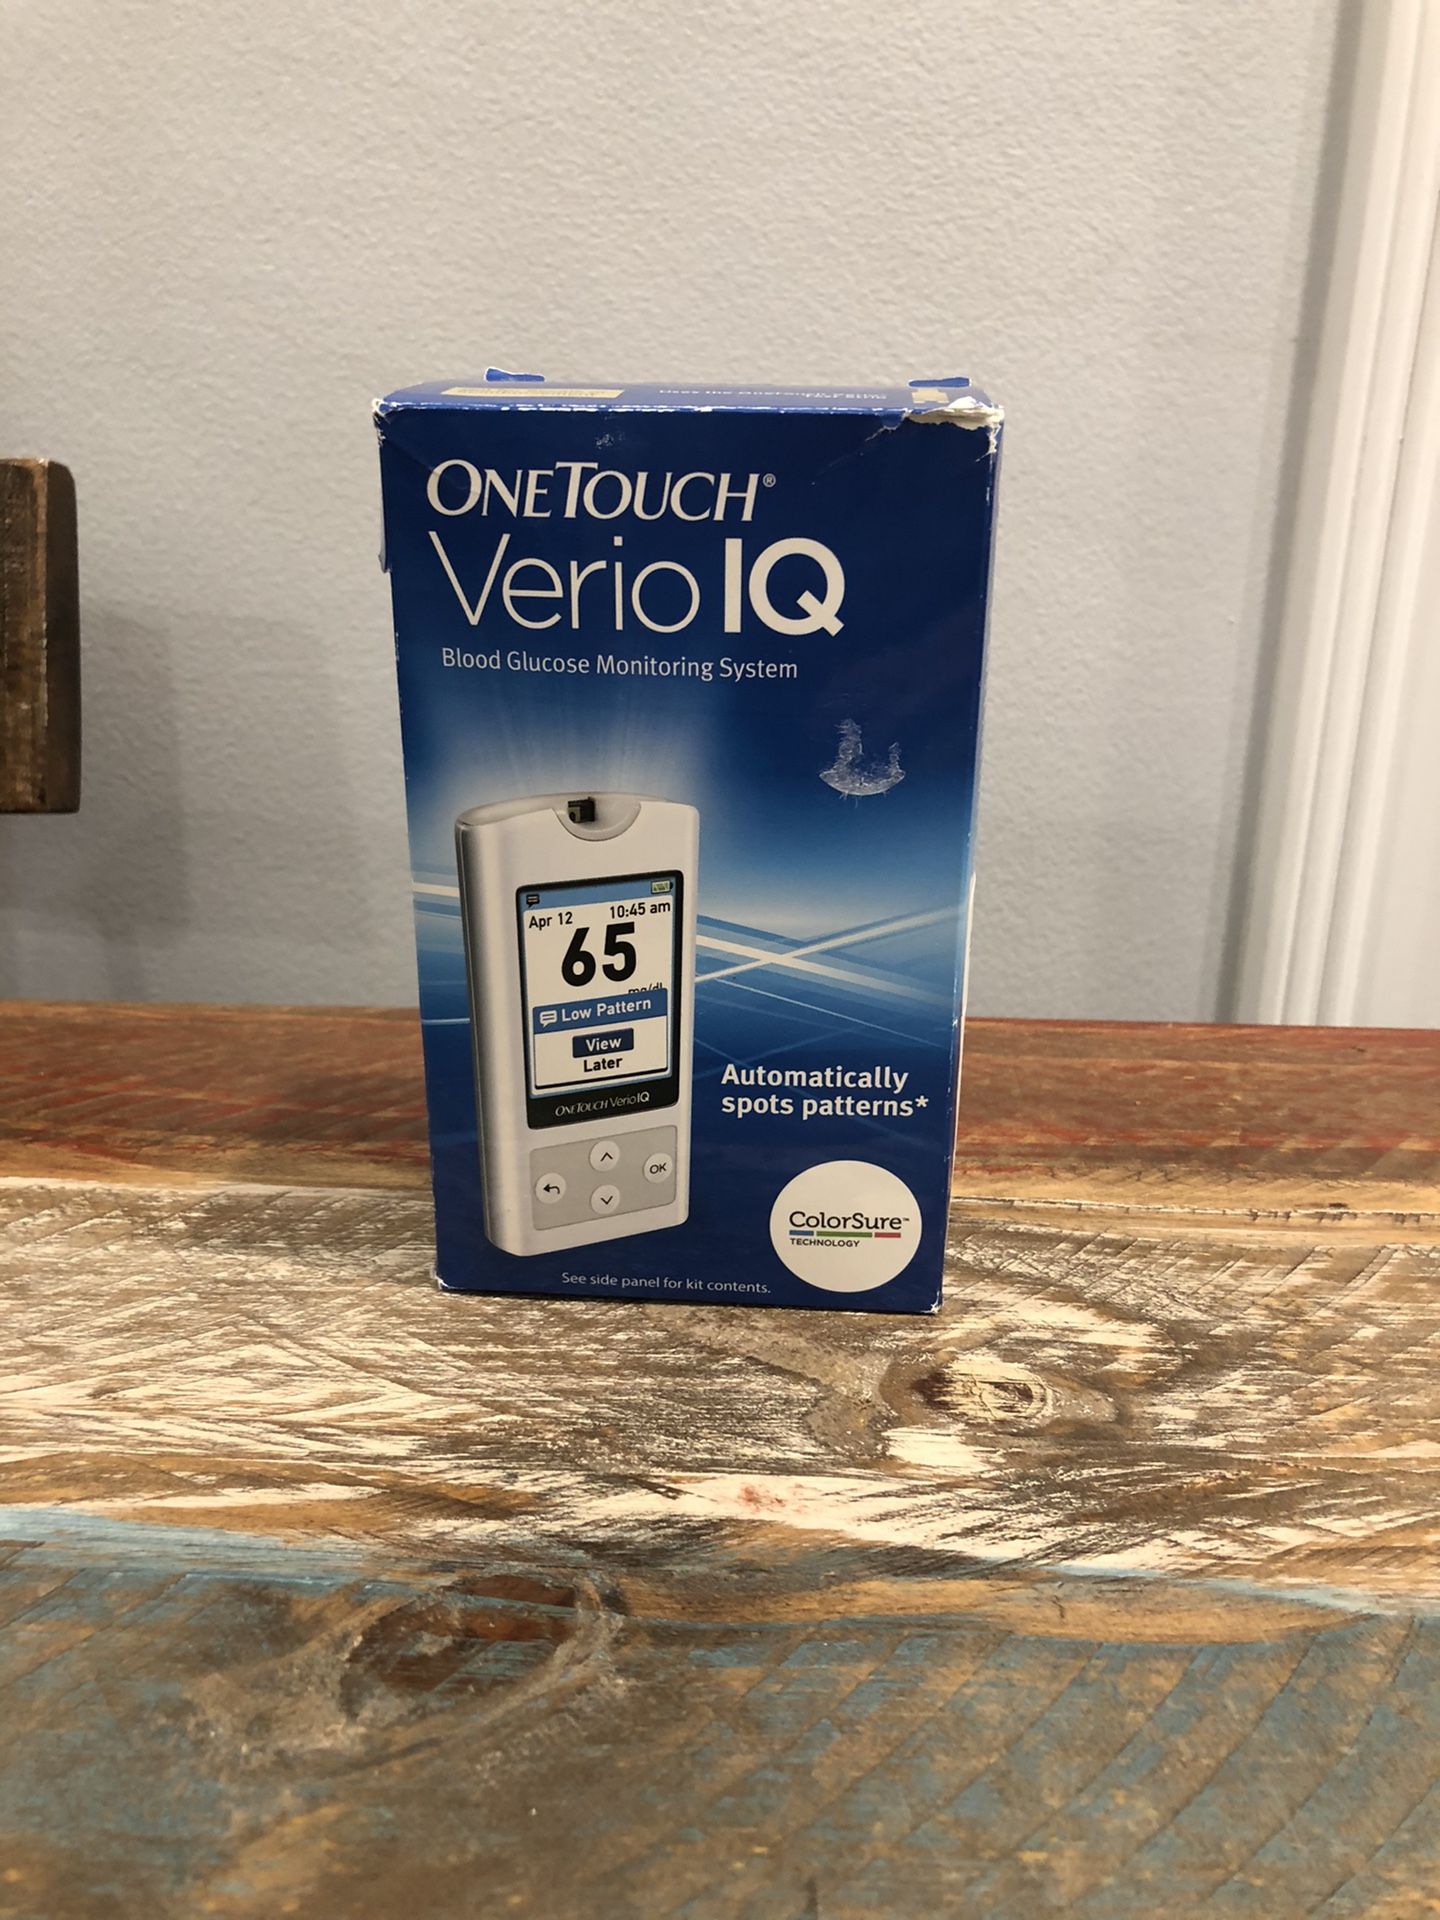 One Touch Verio IQ - Blood Glucose Monitoring System